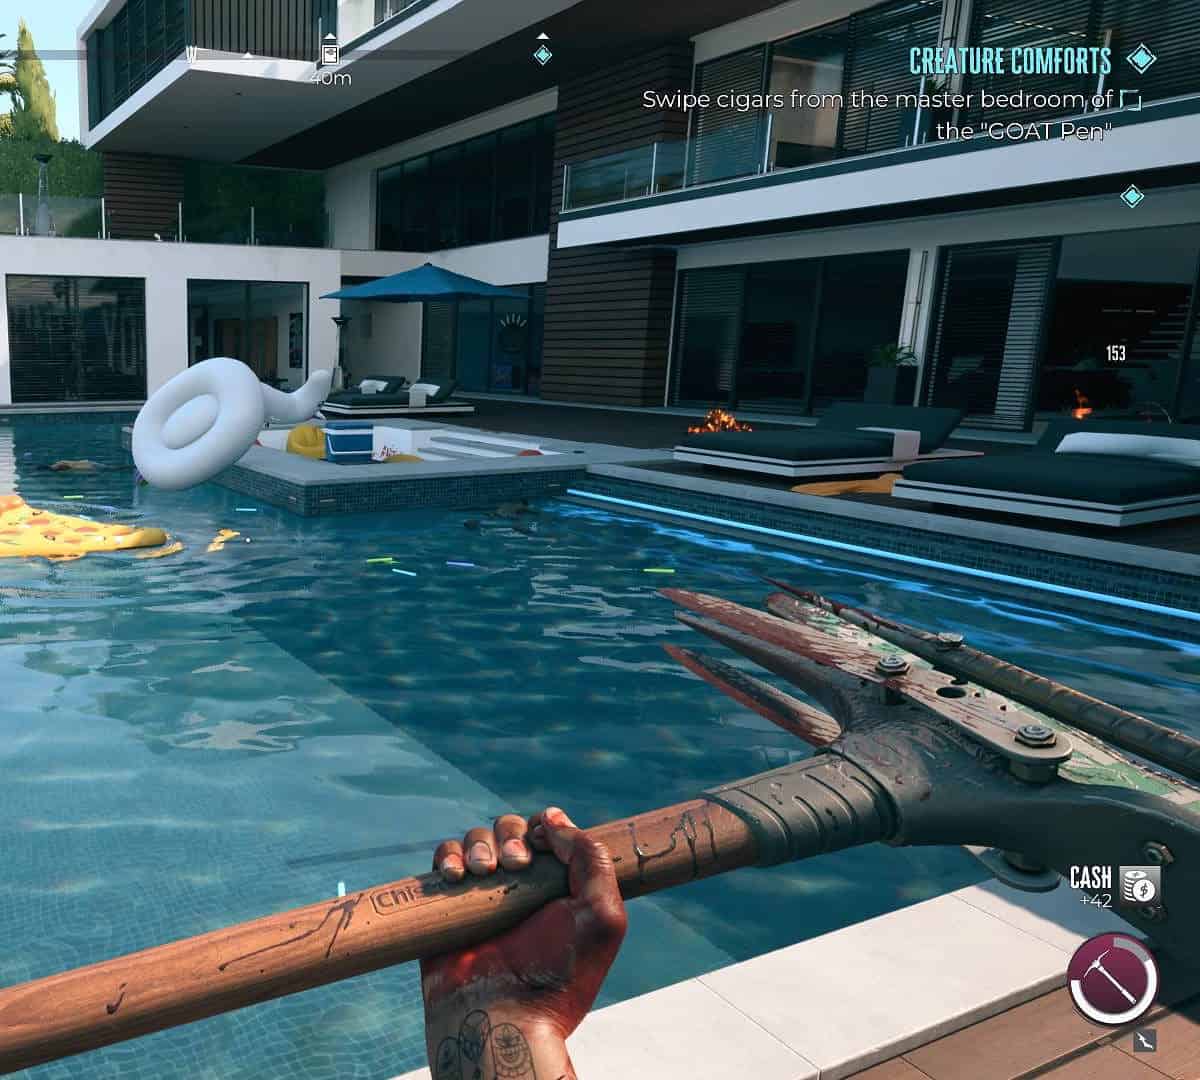 Dead Island 2 Obi's Things Key: The pool where you can find Obi, by the GOAT Pen.